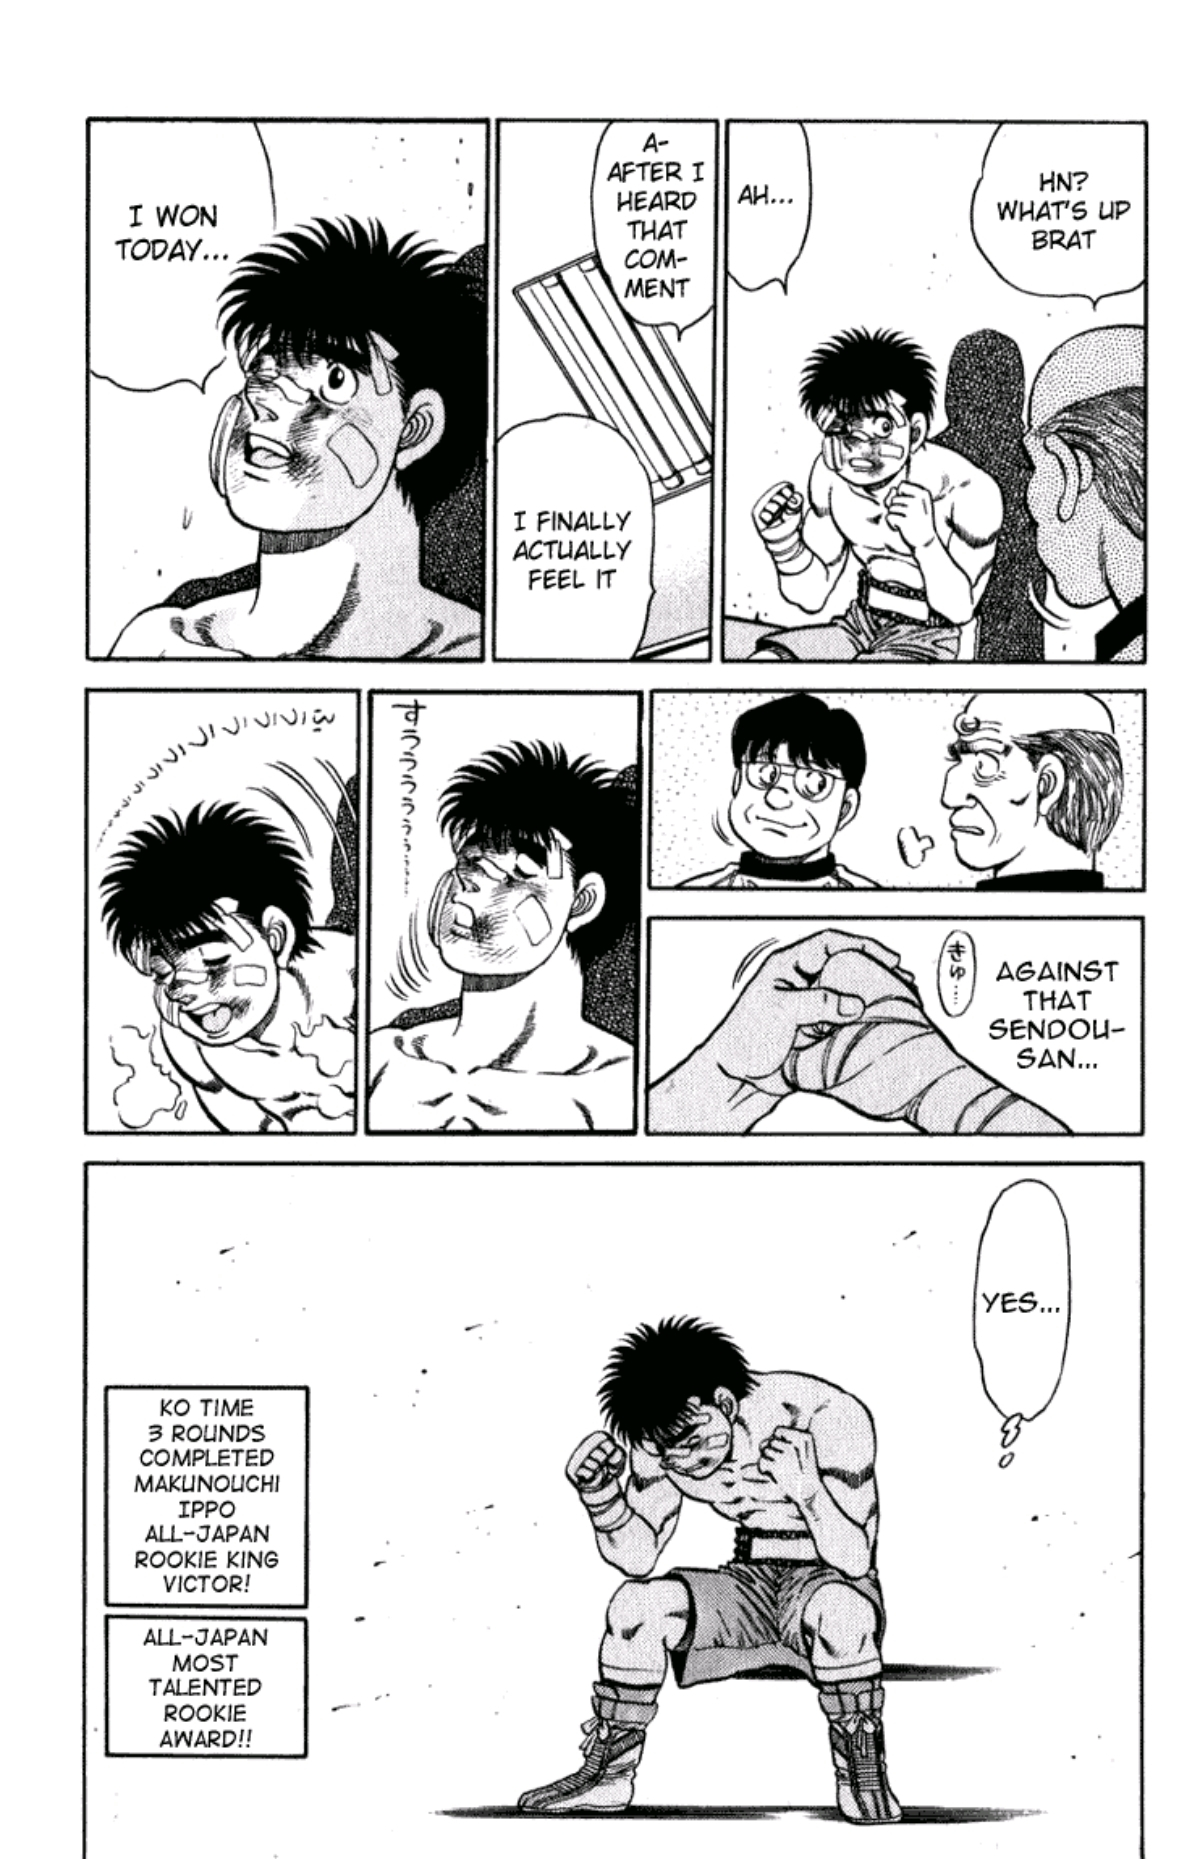 Ippo takes a deep breath, and clutches his fists exhuberantly. He is the all-japan most talented rookie! His record is 7 fights, 7 wins. 